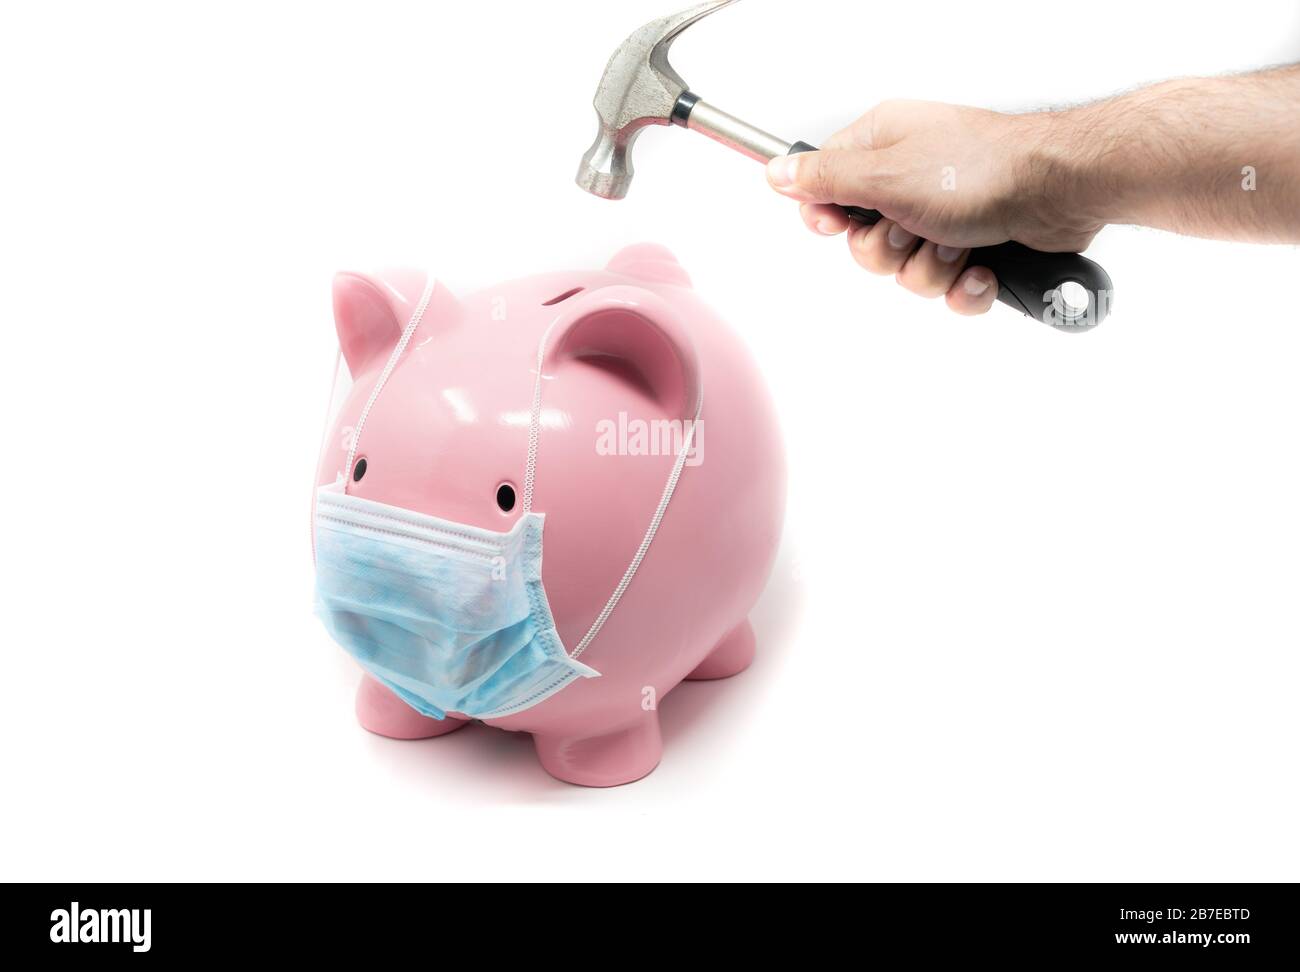 Piggybank wearing surgery mask and hand with hummer ready to crash it. Concept of the impact of a pandemia in world Economy Stock Photo